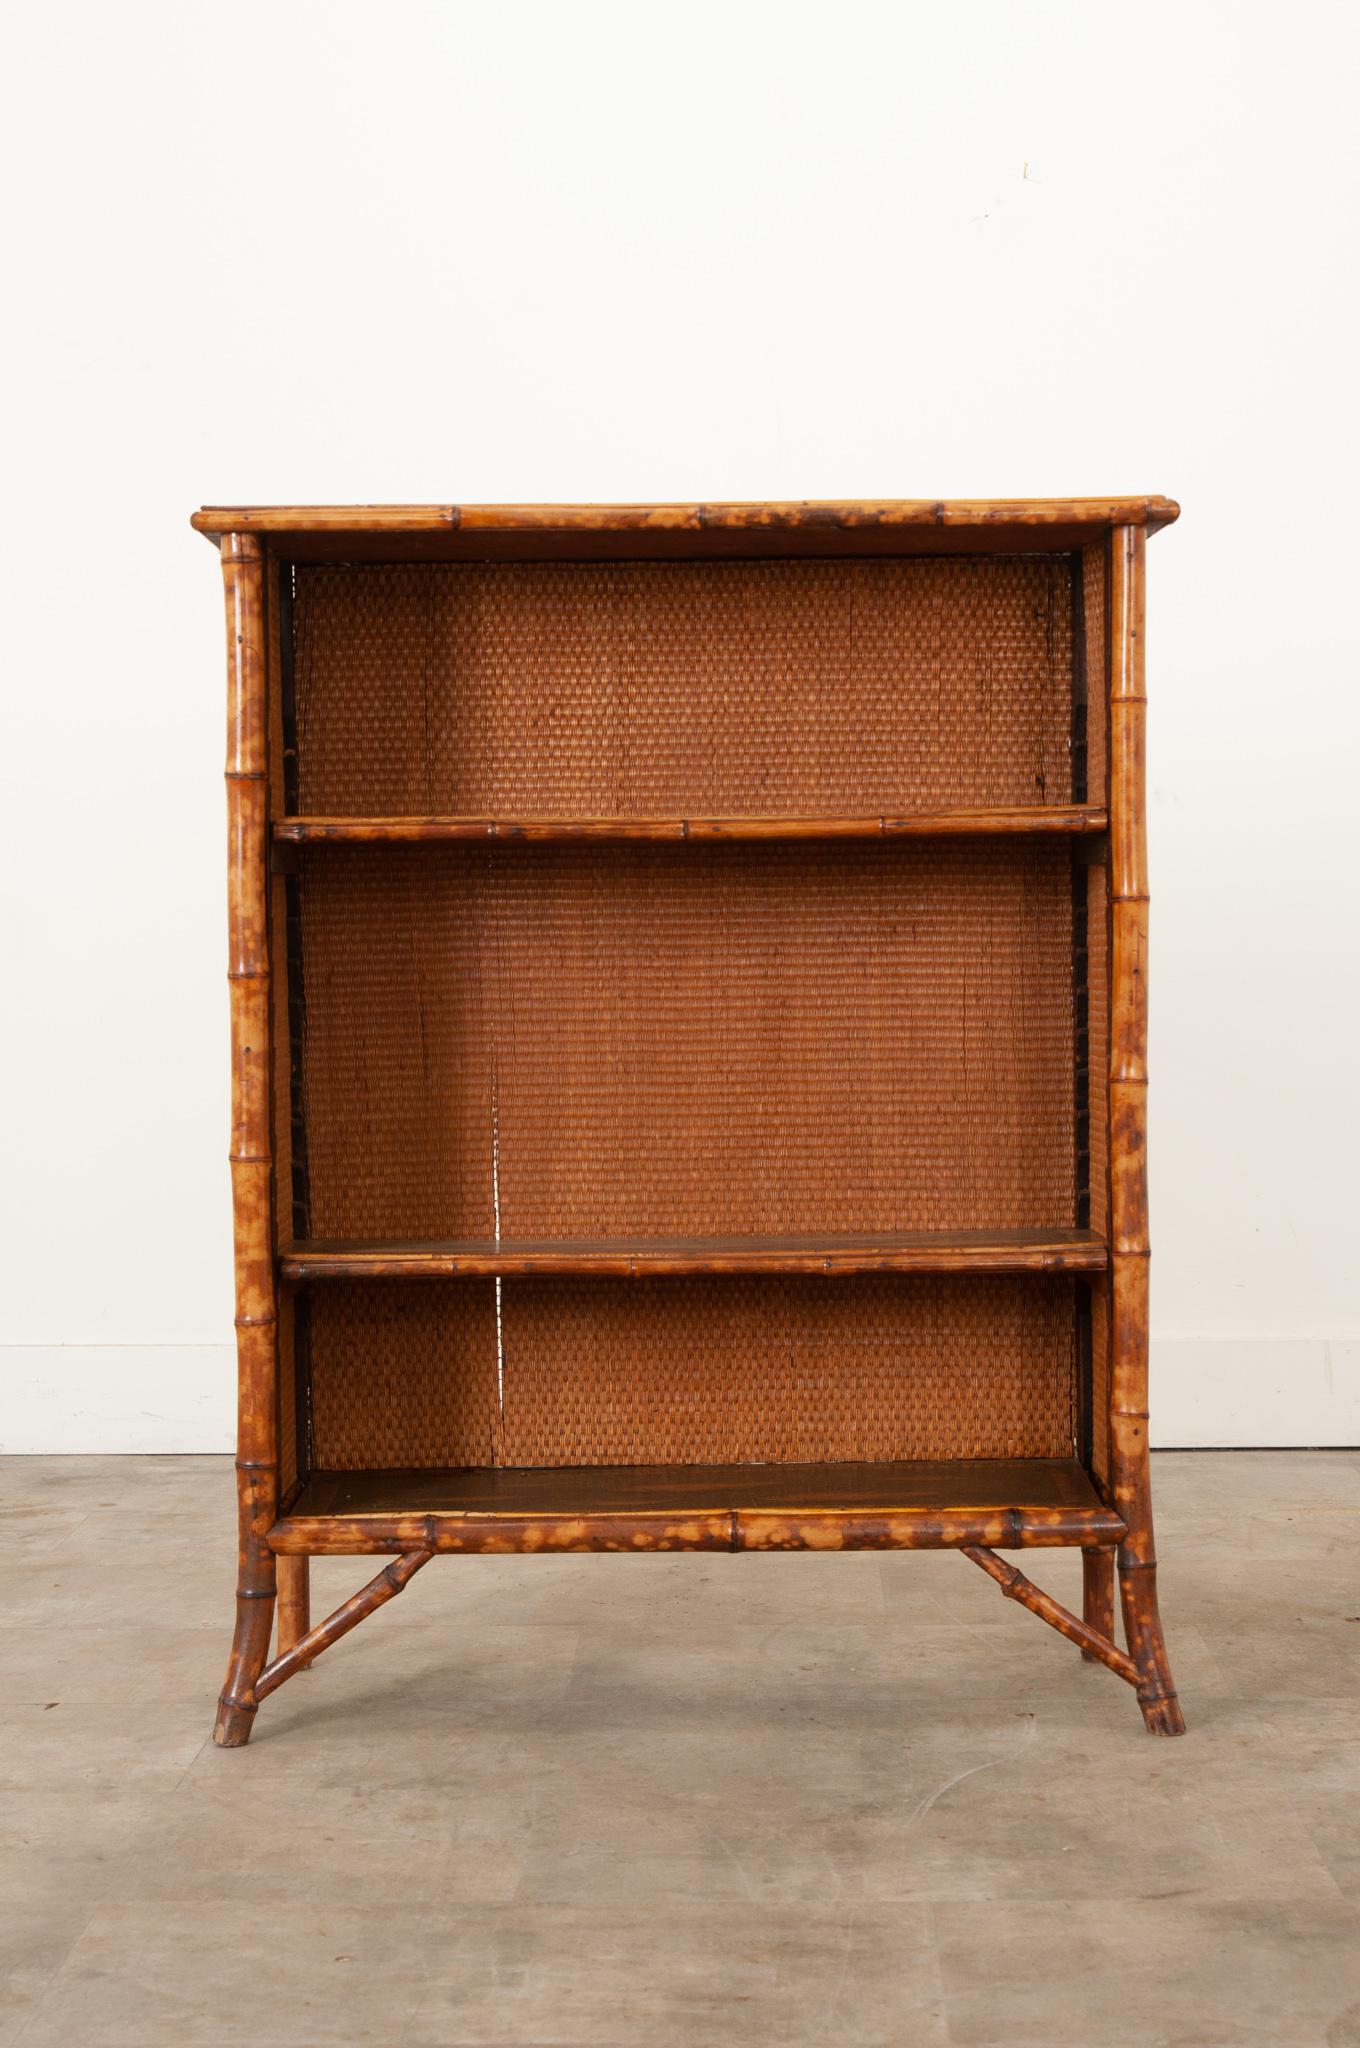 A 19th century bamboo bookcase with seagrass panels and fish motif decoupage details. The interior has two adjustable shelves at 9 1/2”deep.  The front legs are splayed outward, adding not only to the stability of the piece, but also creating a more